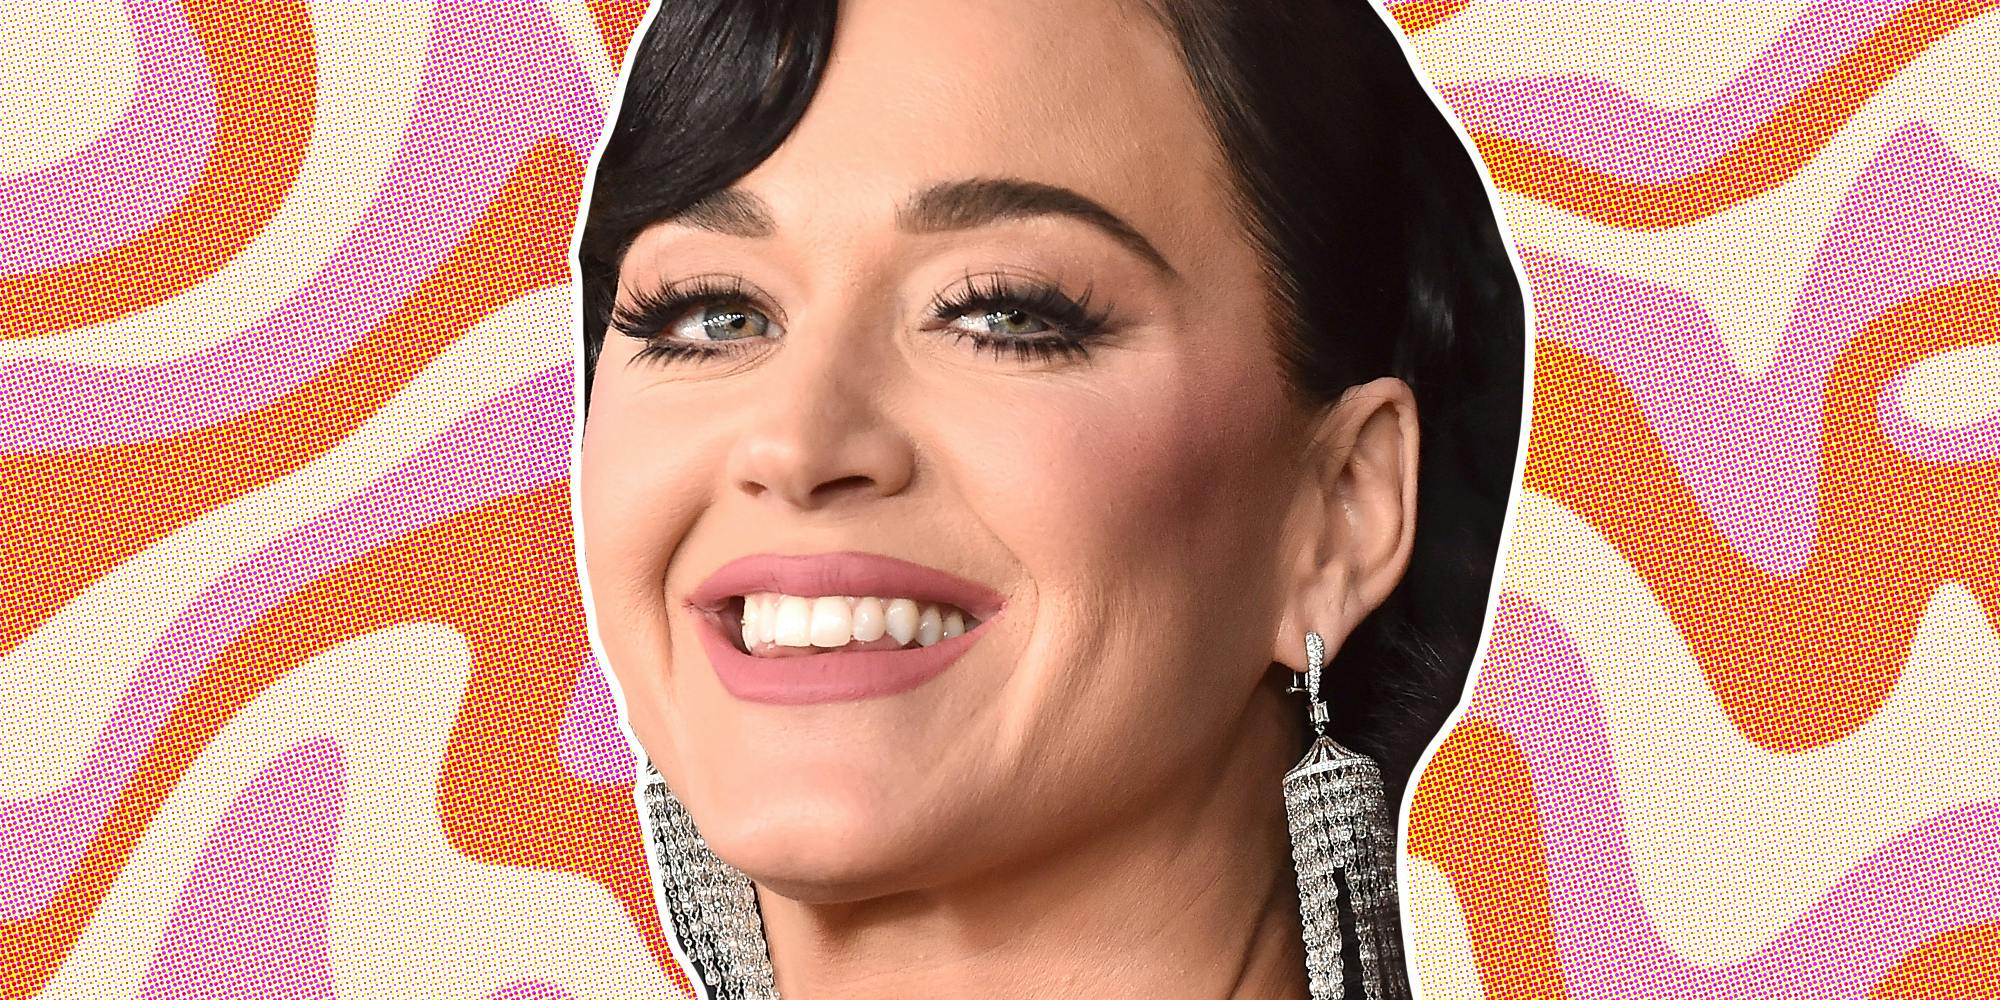 Katy Perry in front of graphic background